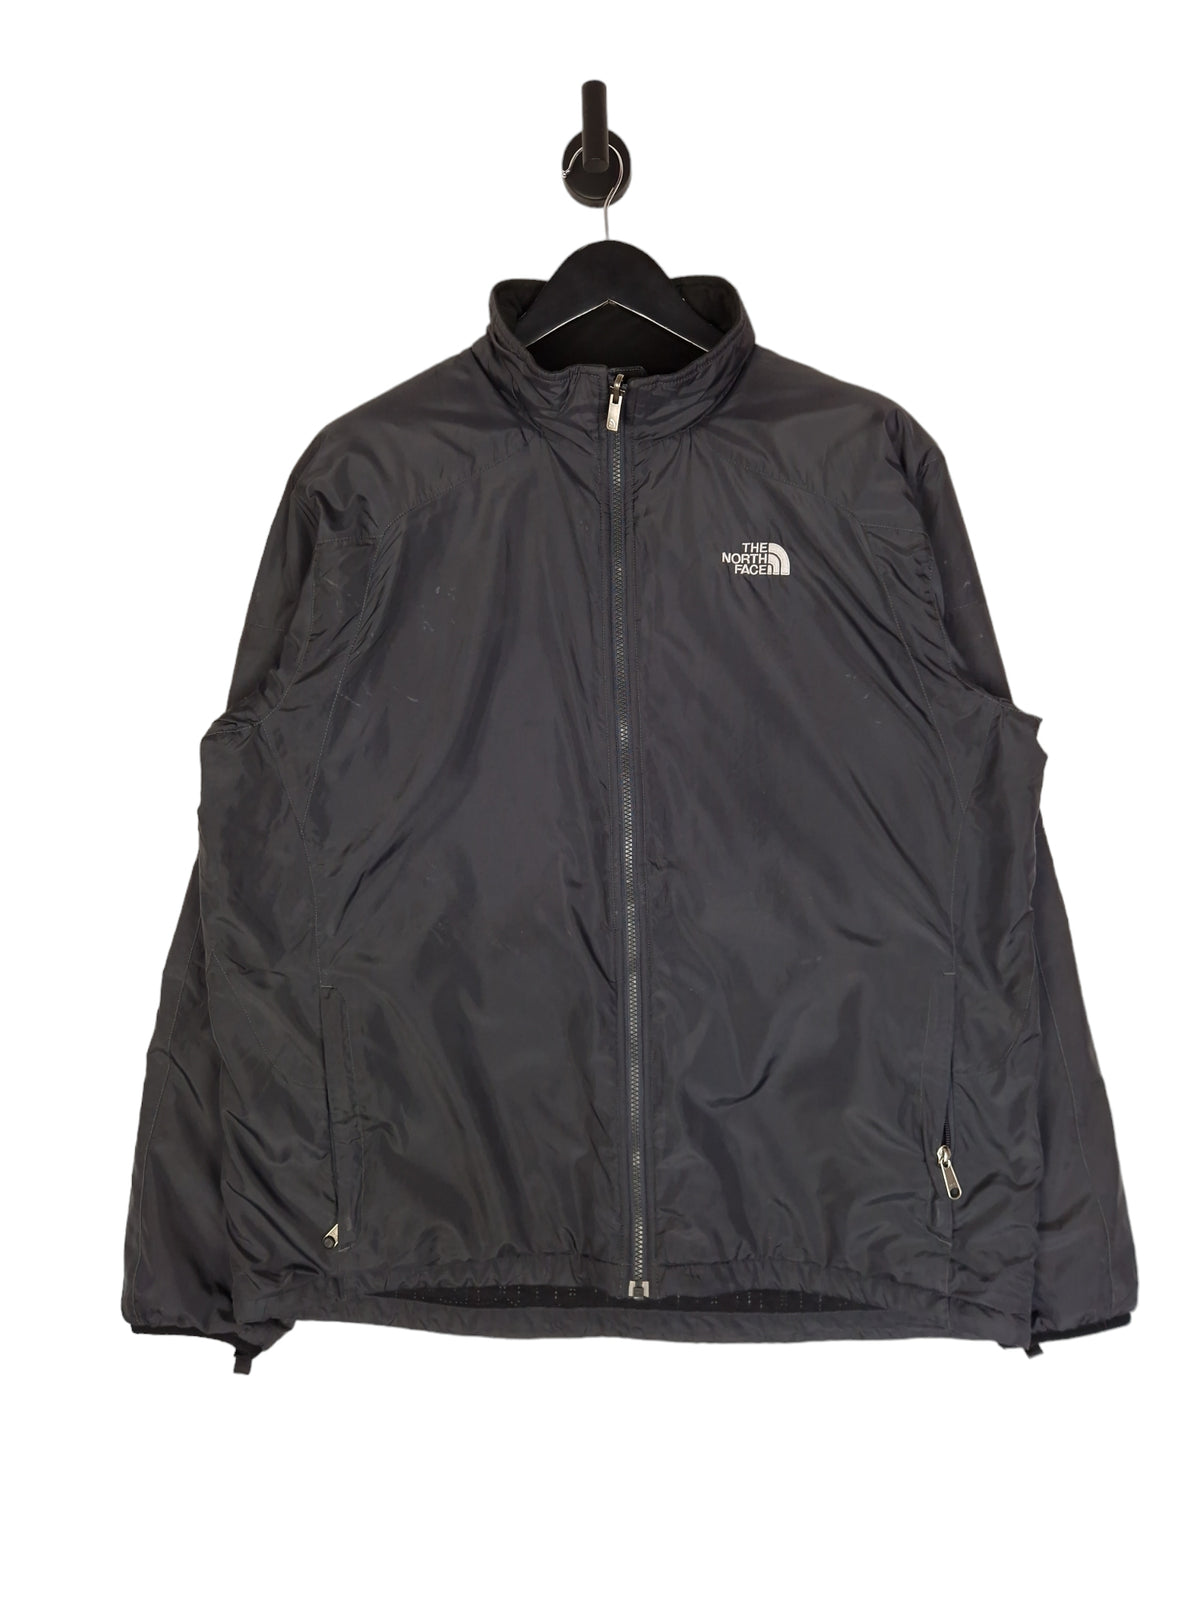 The North Face Padded Jacket - Size XL